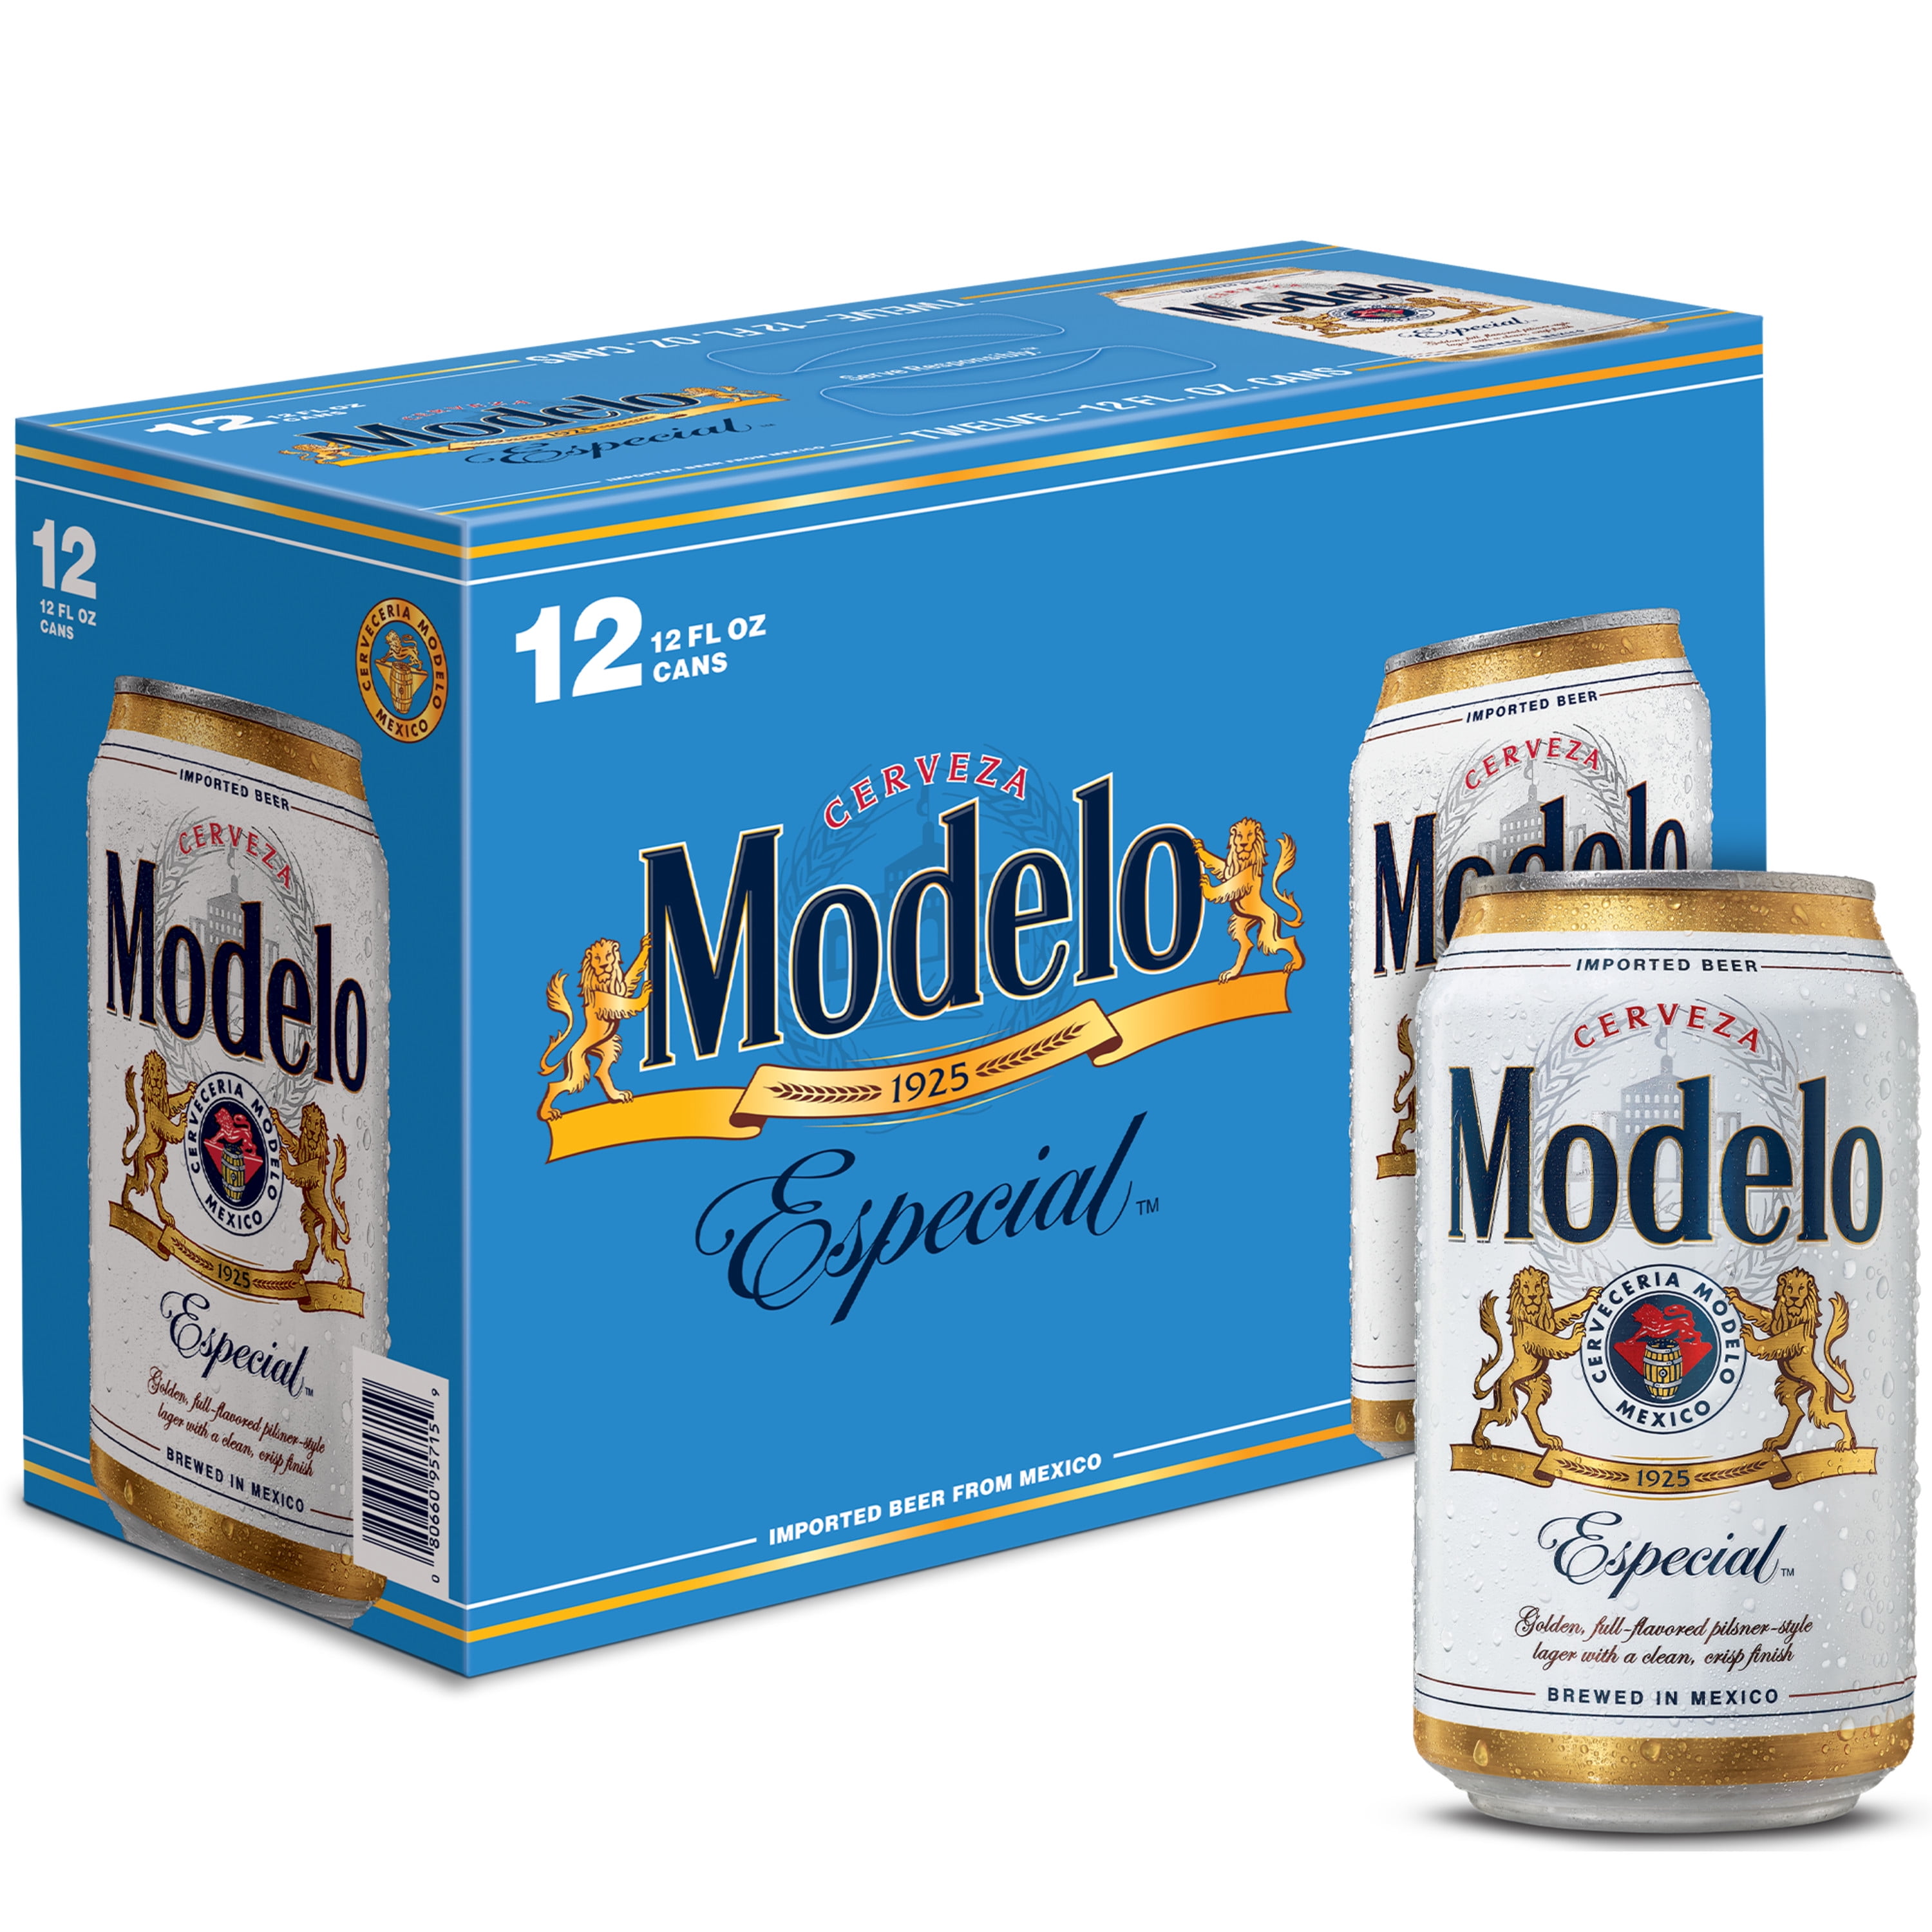 Modelo Especial Mexican Lager Beer, 12 Pack, 12 fl oz Cans, 4.4% ABV ...